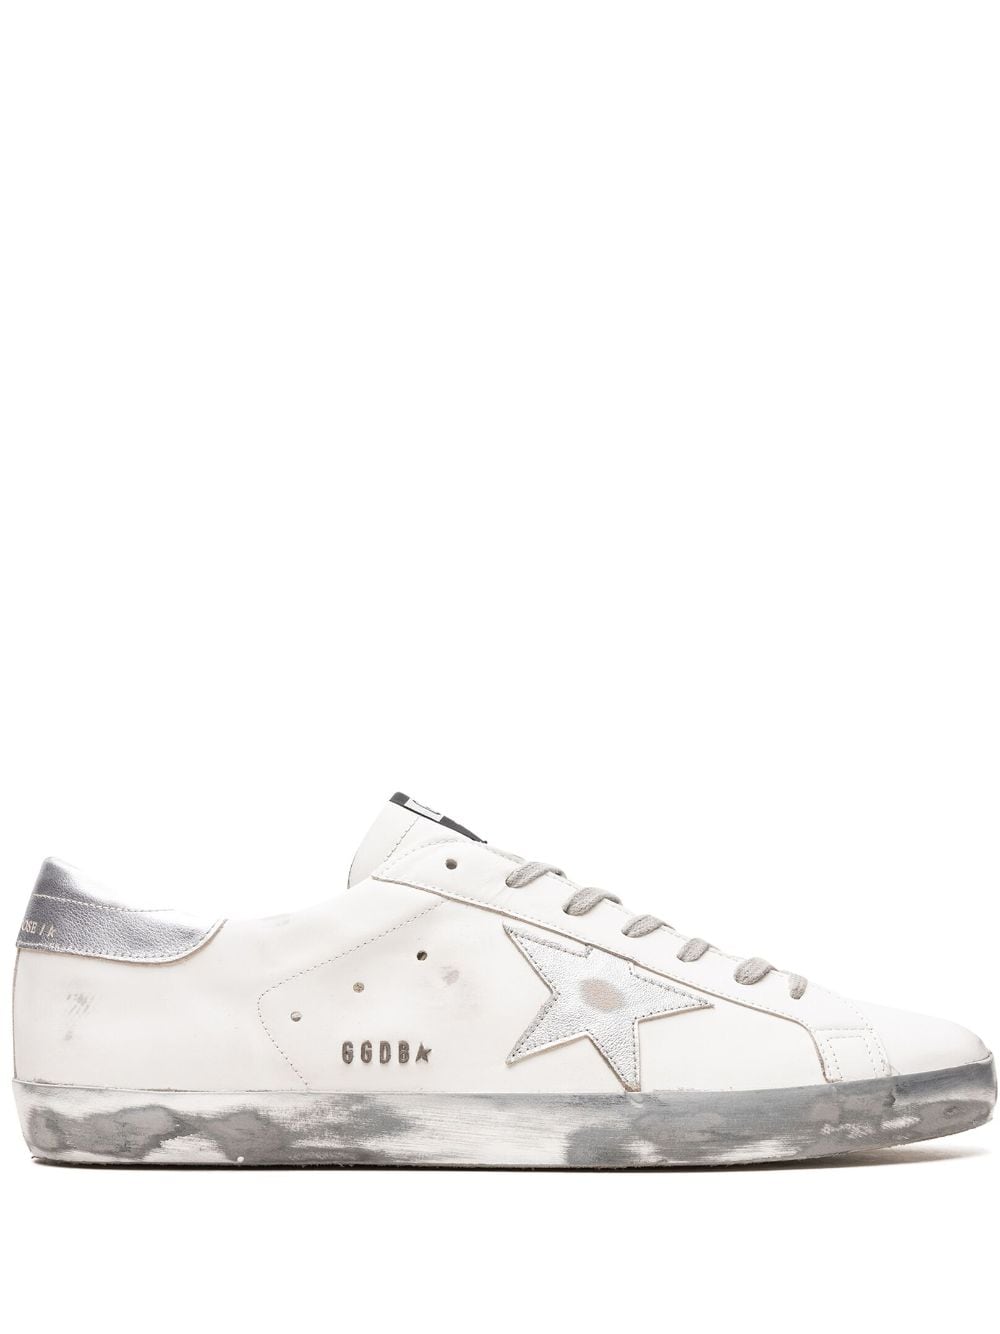 Golden Goose "Super-Star Classic ""White/Silver"" sneakers" - Wit